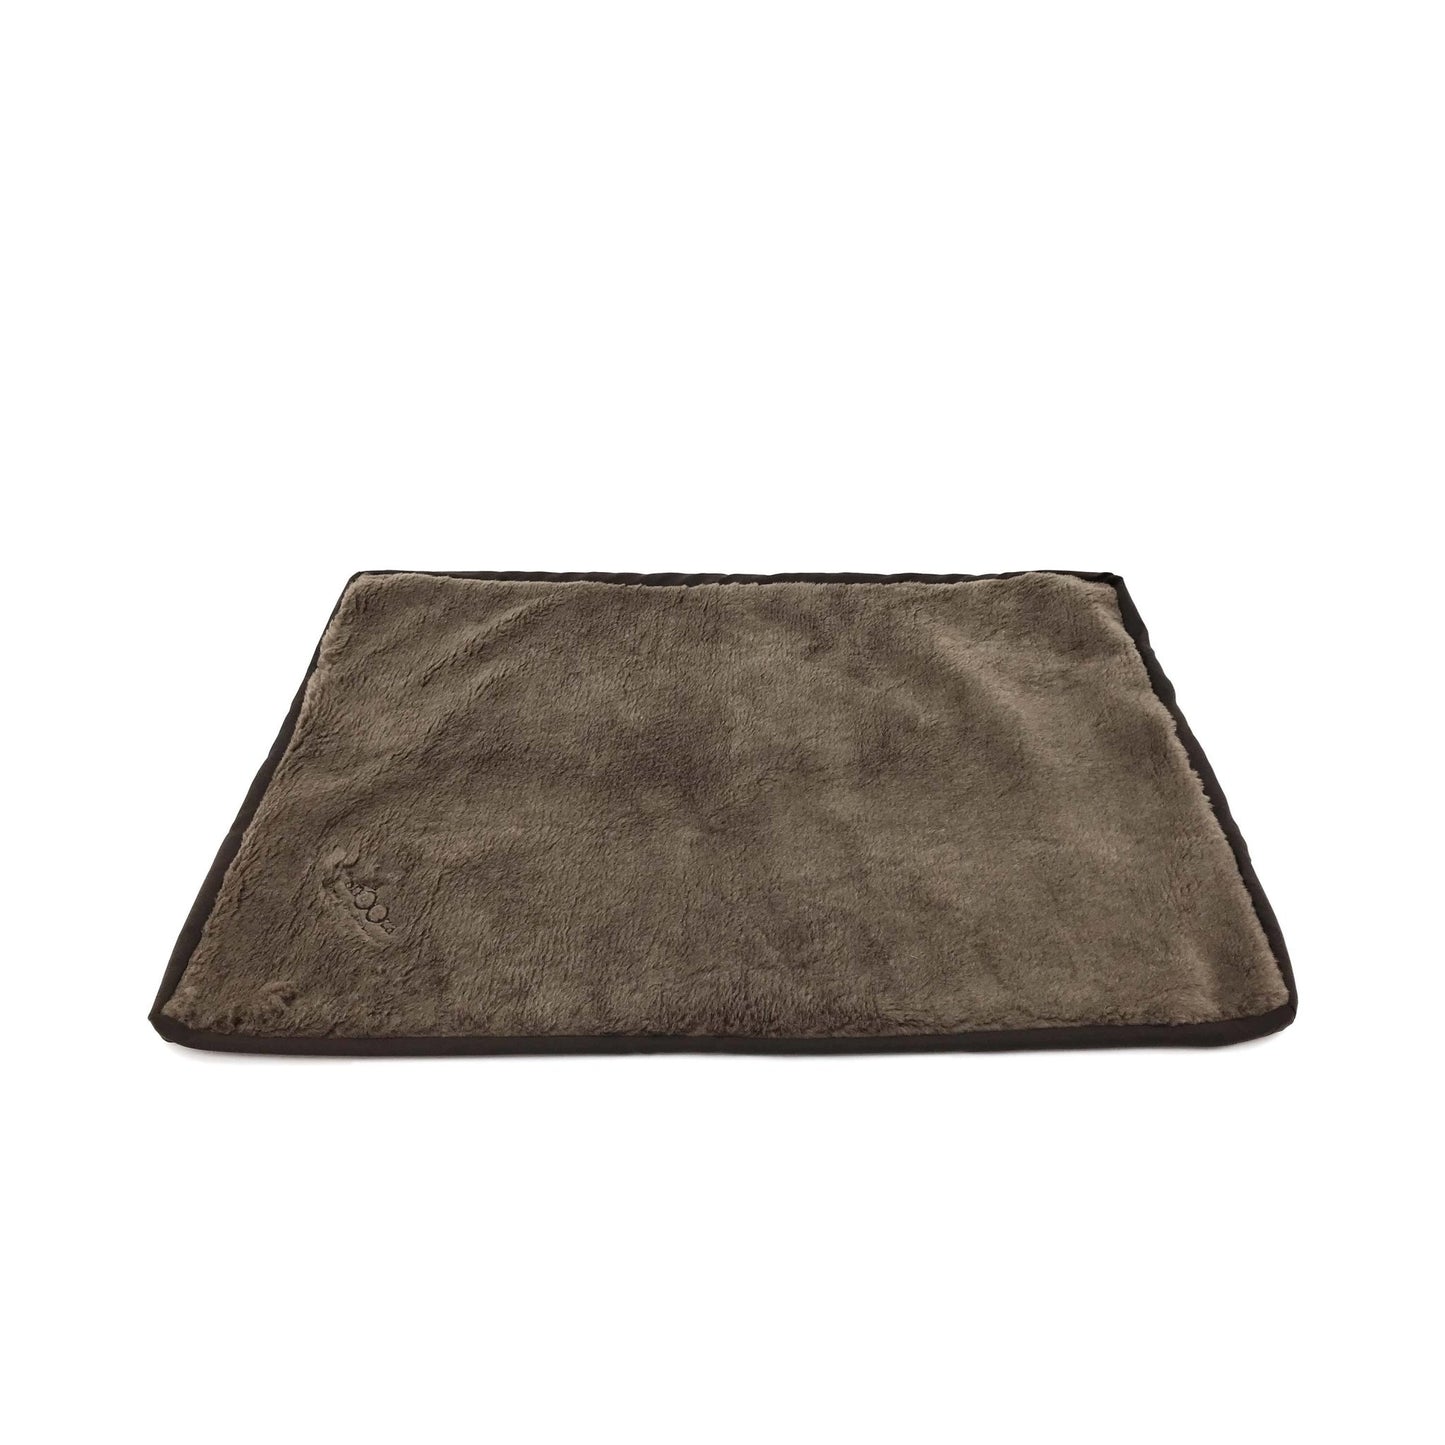 Snooza Orthobed Cover Brown Large - Woonona Petfood & Produce